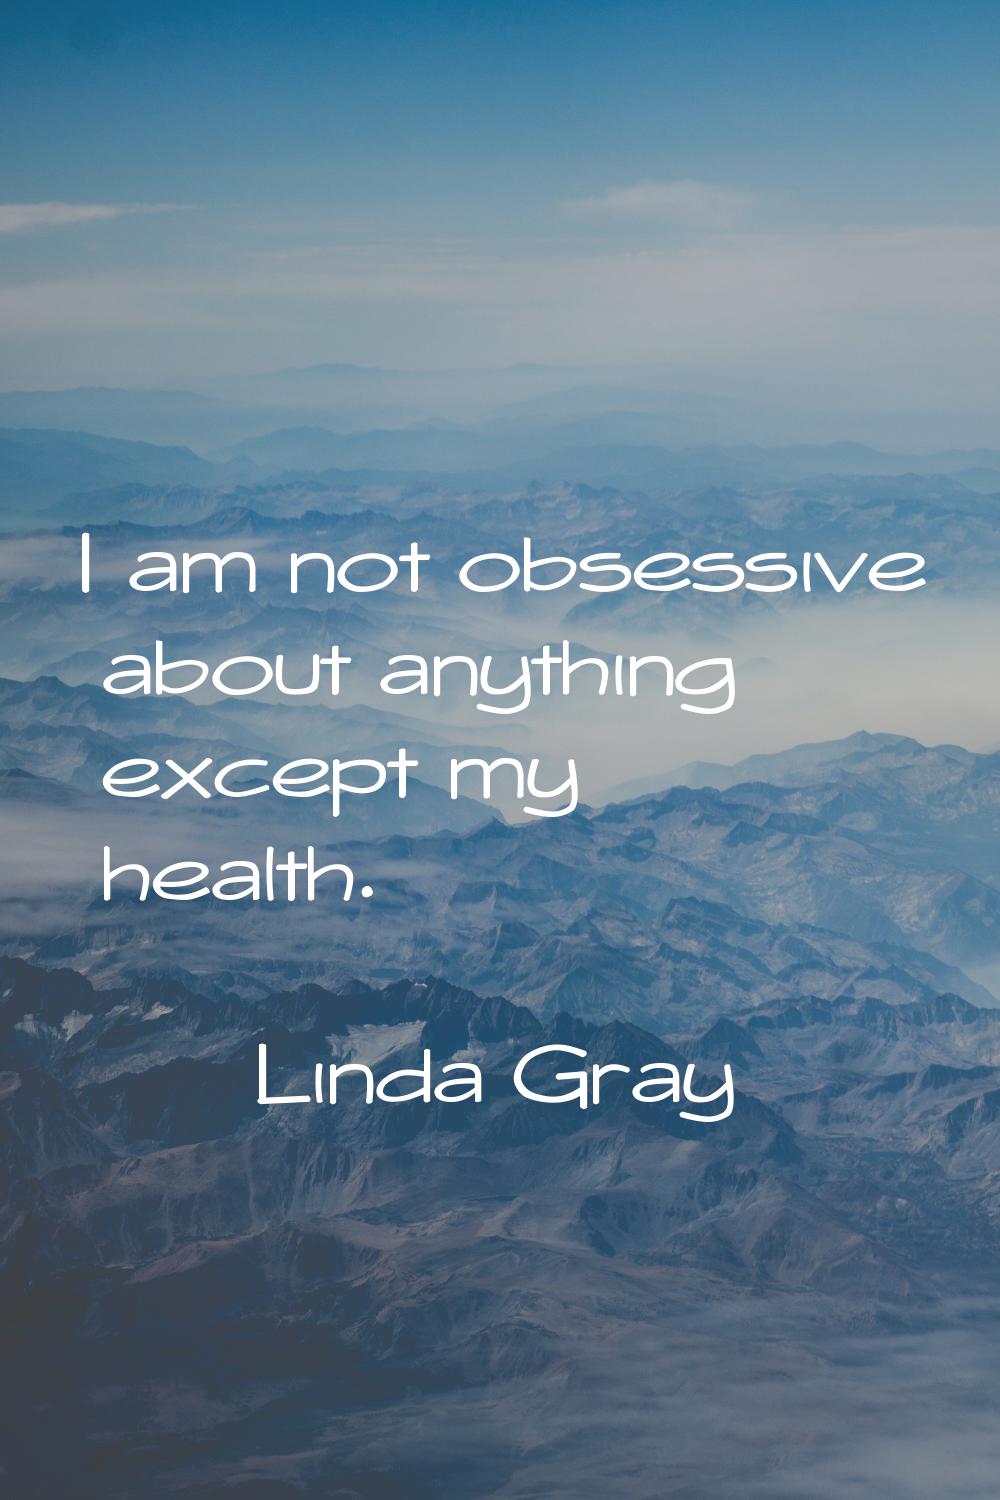 I am not obsessive about anything except my health.